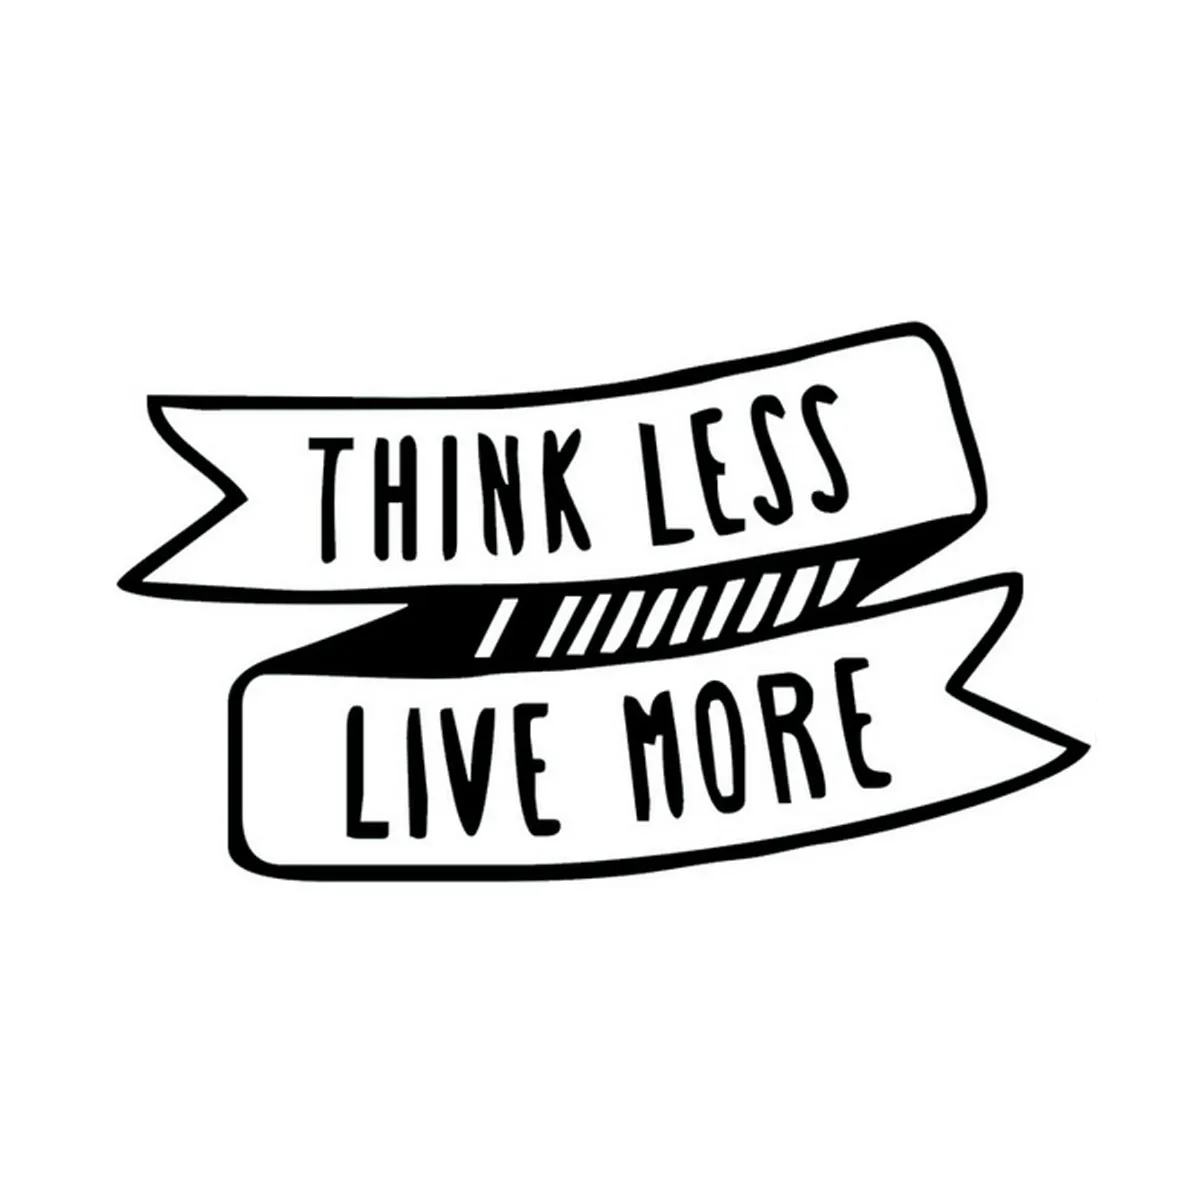 Image Think Less Live More Funny Car Sticker for Wall Home Glass Window Door Laptop Motorcycle Auto Truck Vinyl Decal 17.9cmX10.4cm